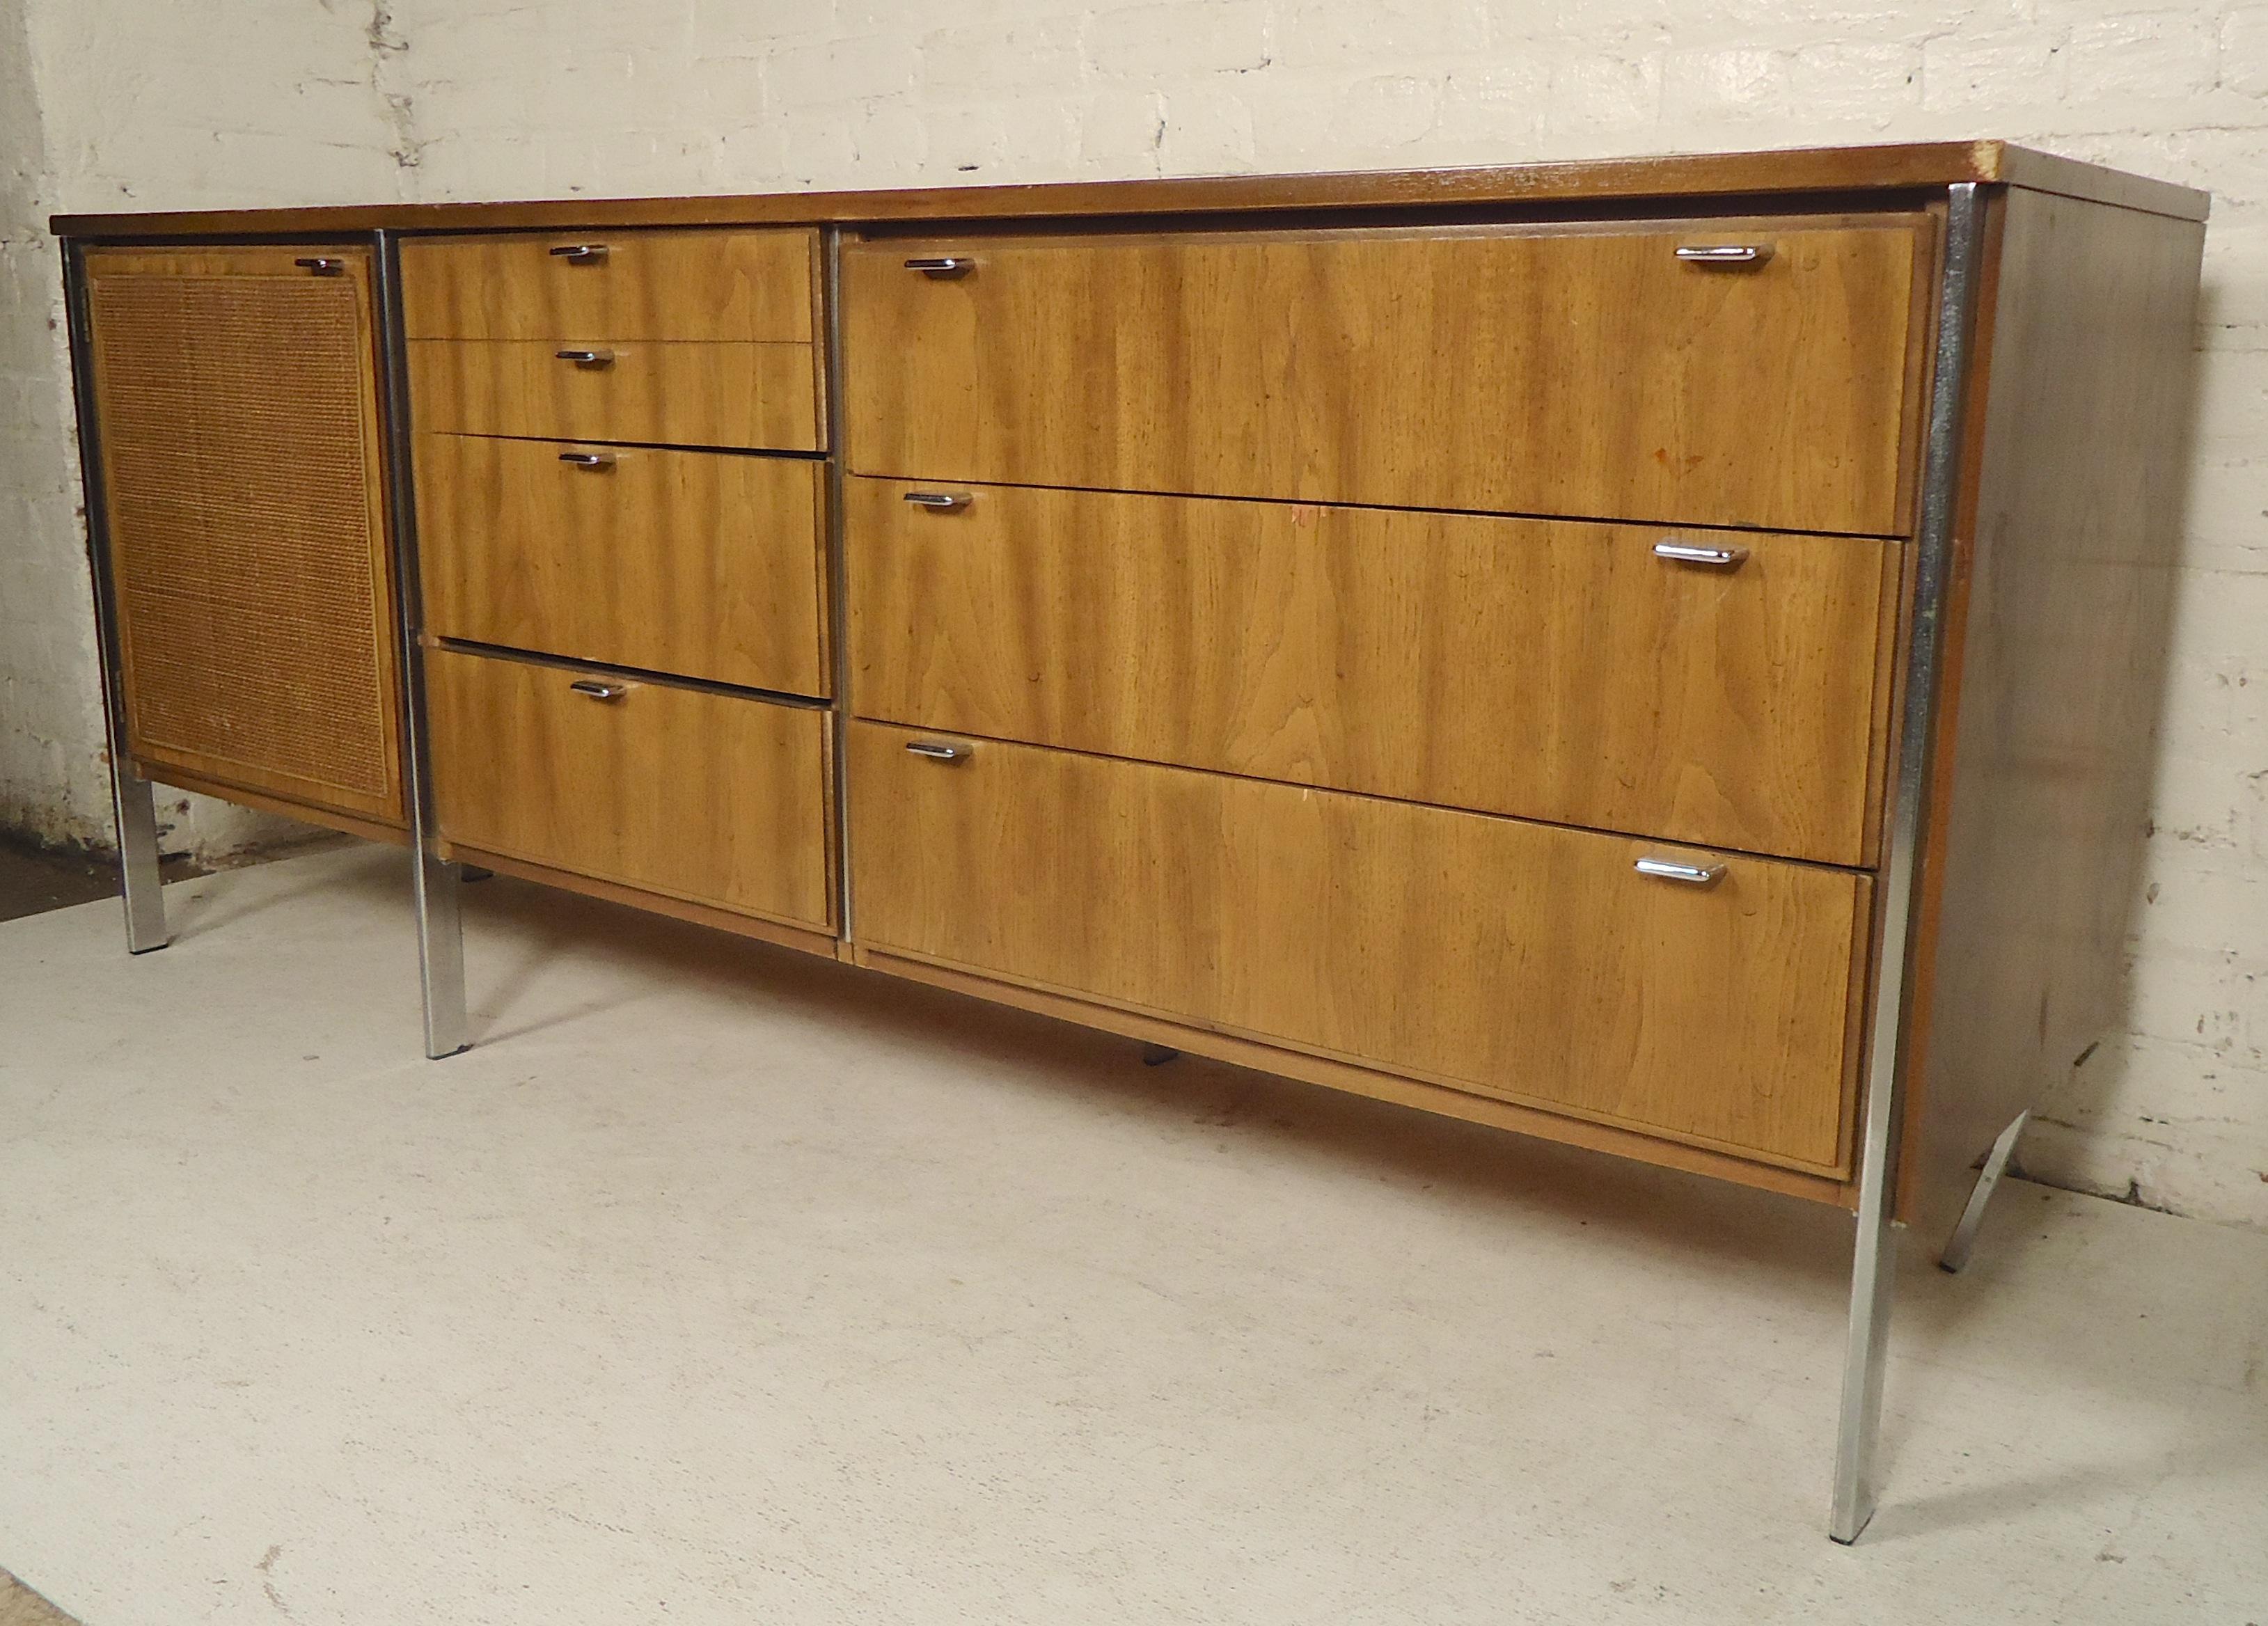 Long sideboard with ample storage for home or office. Nine total drawers with chrome accents and cane front door.

(Please confirm item location - NY or NJ - with dealer).
 